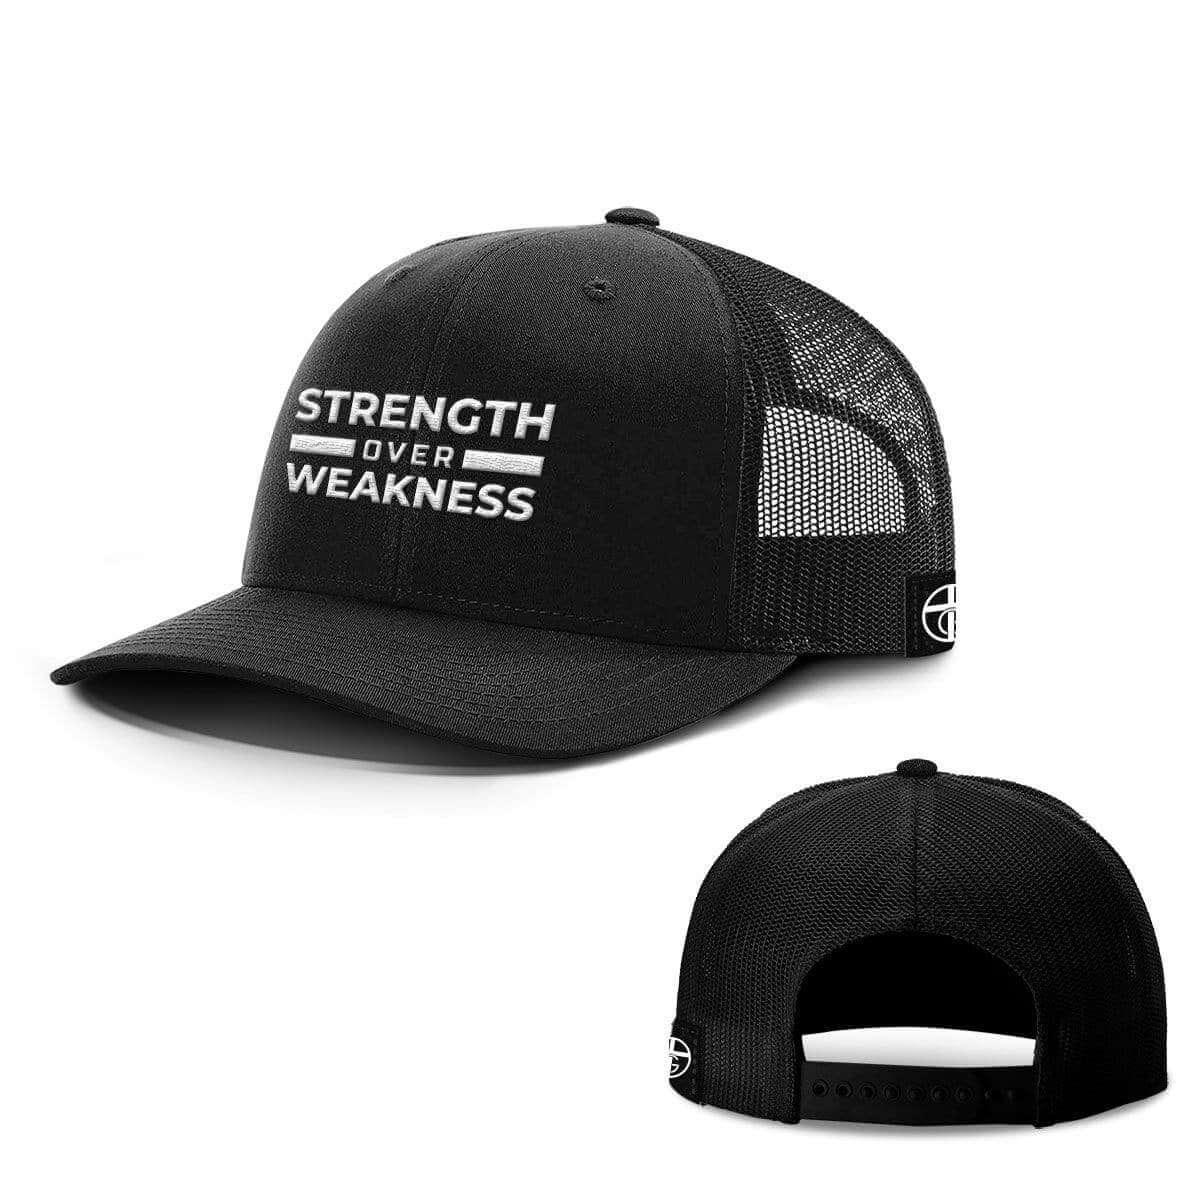 Strength Over Weakness Hats - Our True God